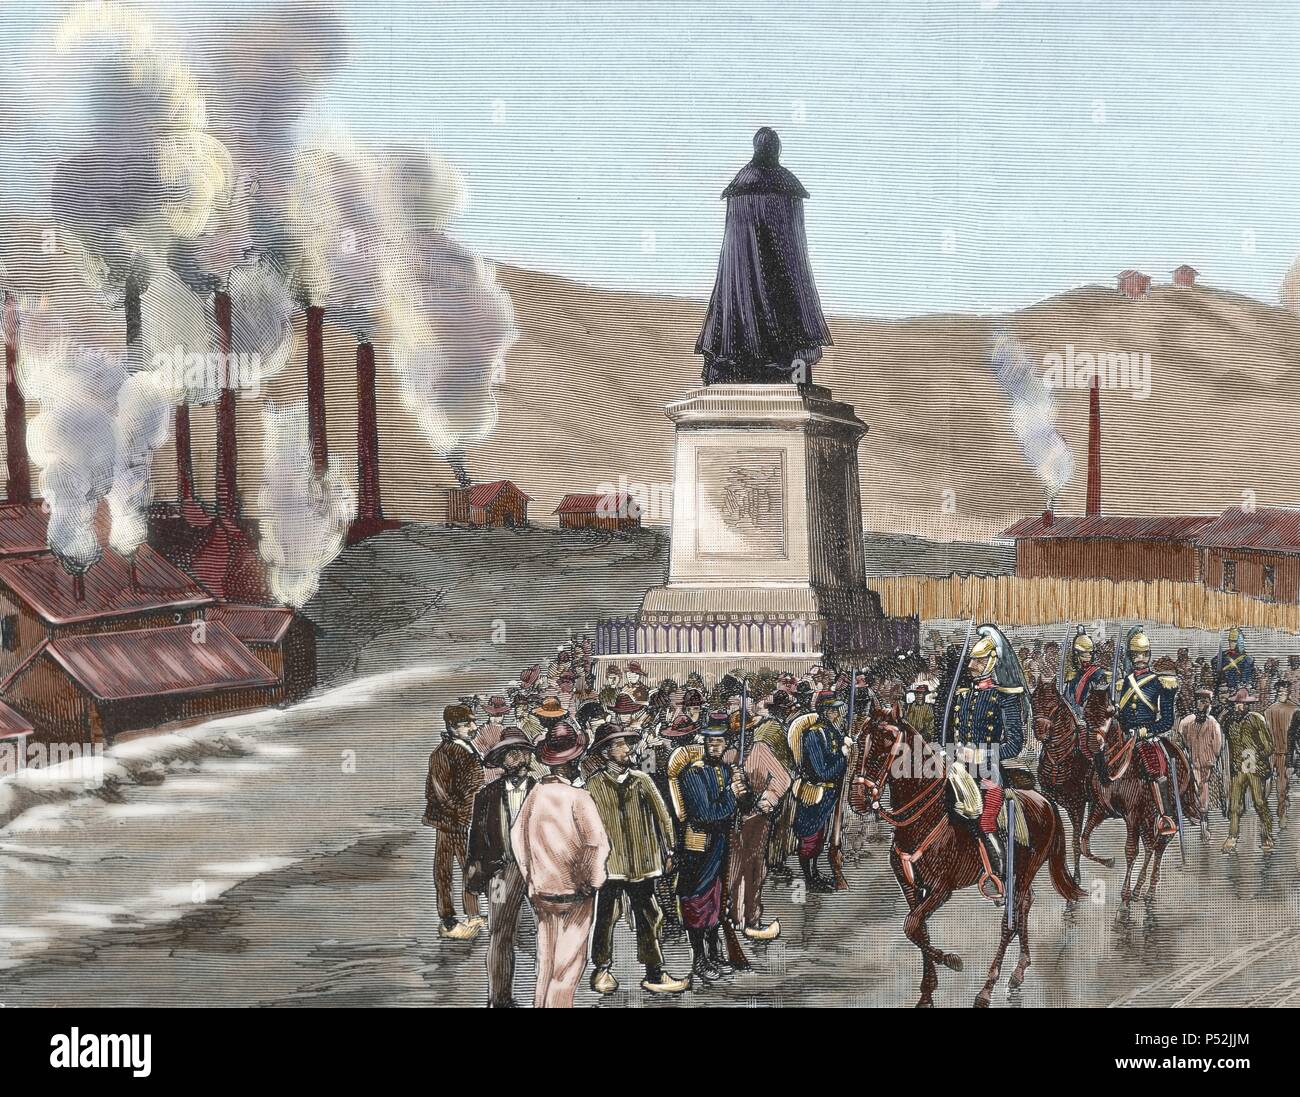 History of France. Decazeville strike. Military patrols crossing the Duke of Decazes square occupied by the strikers in the coal mines and steel mills. Engraving in 1886 by Comba. Colored engraving. Stock Photo